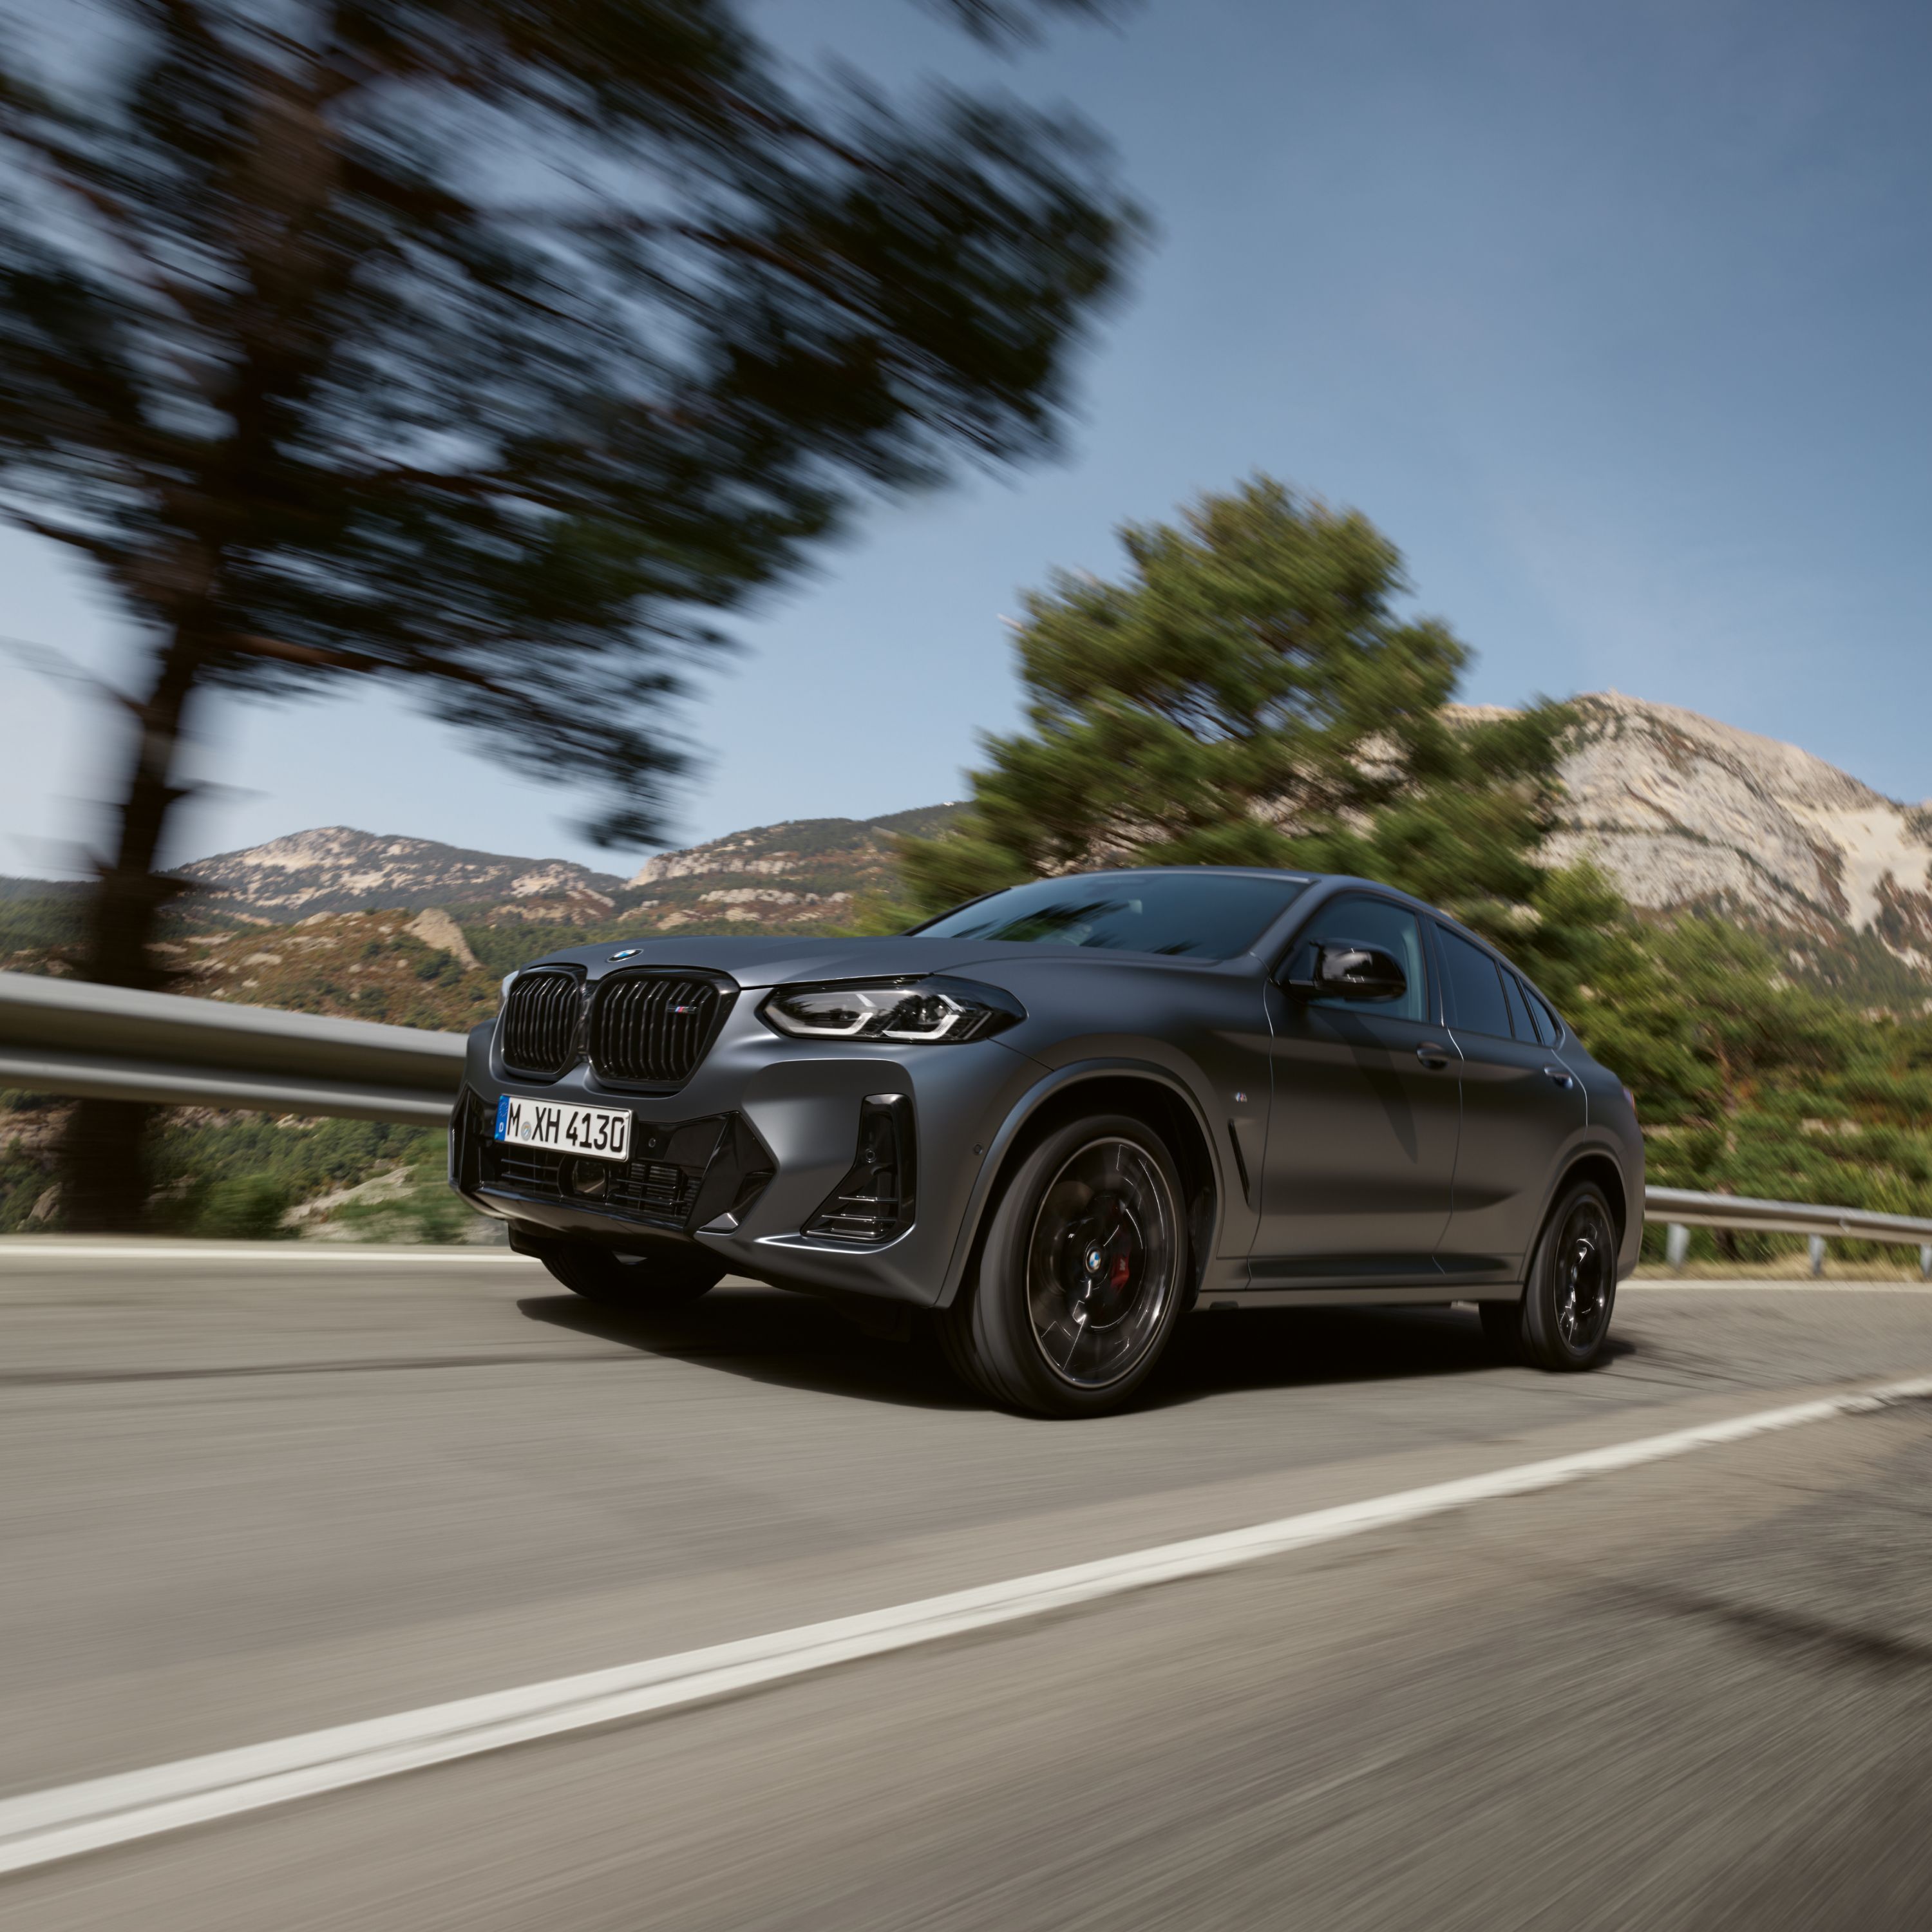 BMW X4 G02 SUV on a mountain pass in front of an alpine landscape